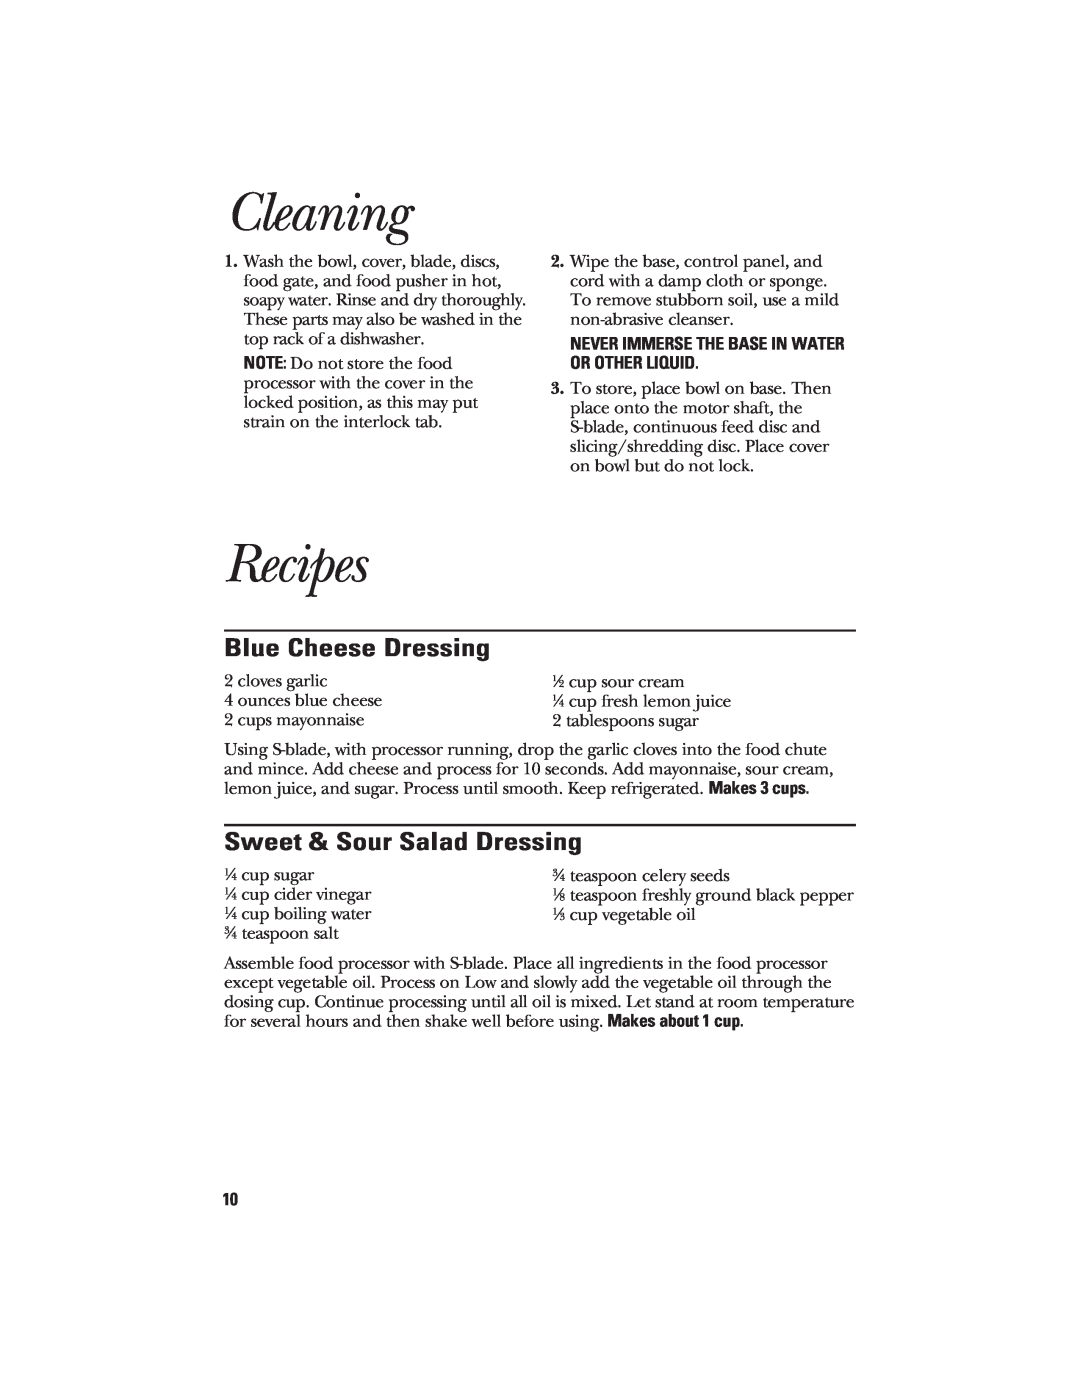 GE 840074400 manual Cleaning, Recipes, Blue Cheese Dressing, Sweet & Sour Salad Dressing 